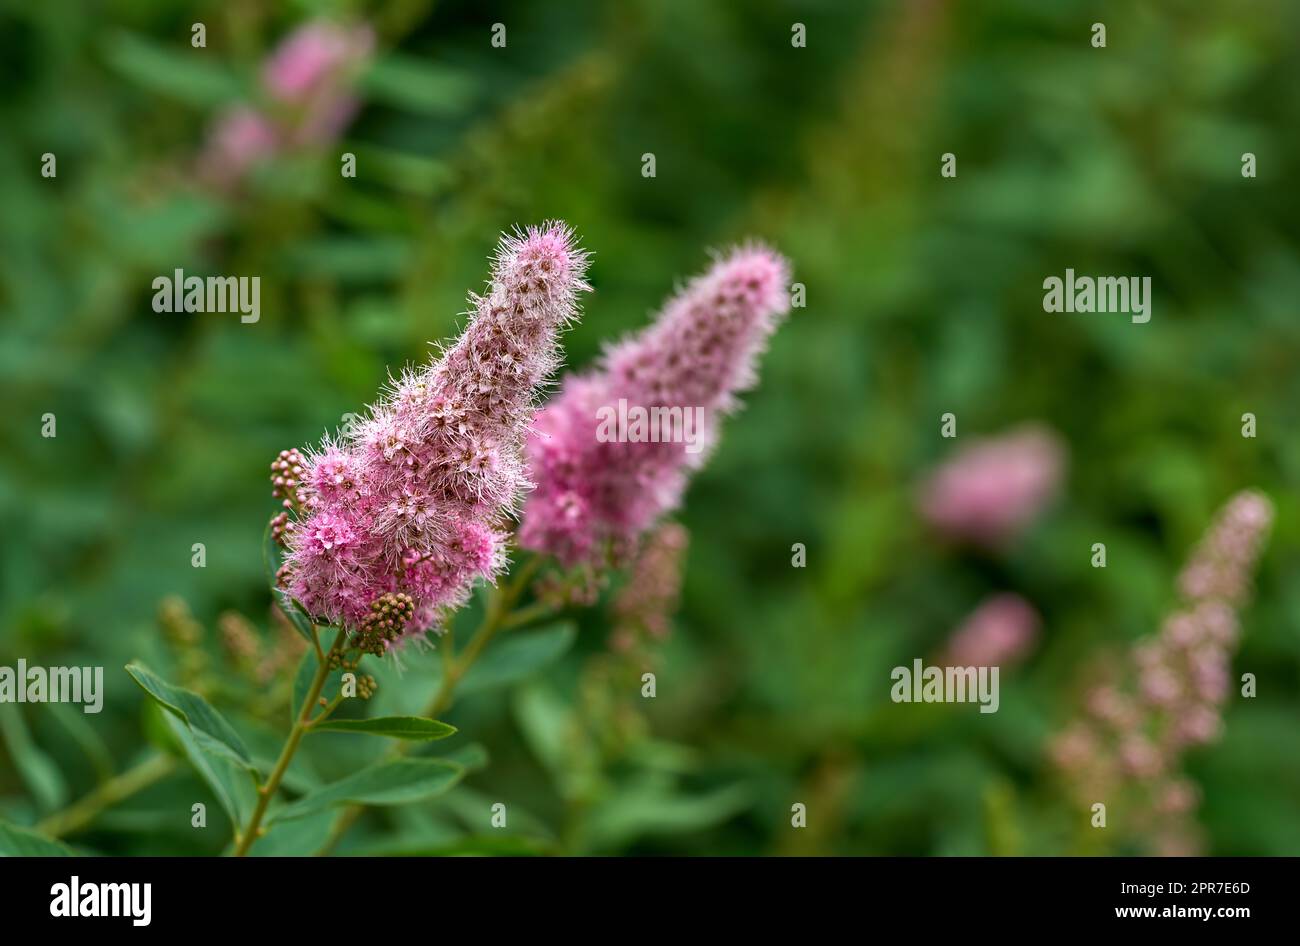 Closeup of a pink smartweed flower growing in a garden with blur background copy space. Beautiful outdoor water knotweed flowering pant with a longroot and leaves flourishing in a nature environment Stock Photo